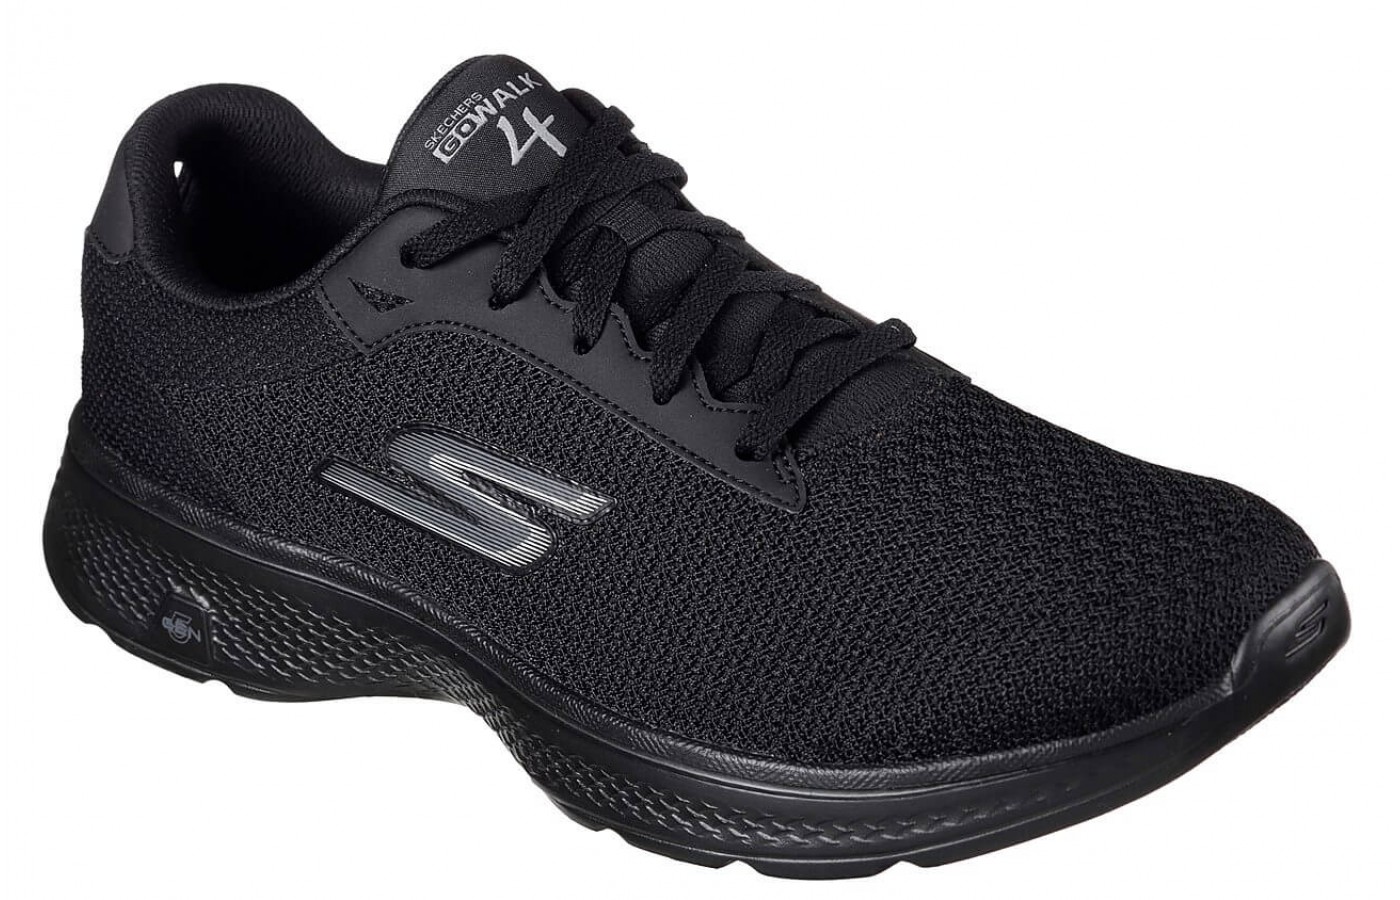 An angled view of the Skechers GOwalk 4.